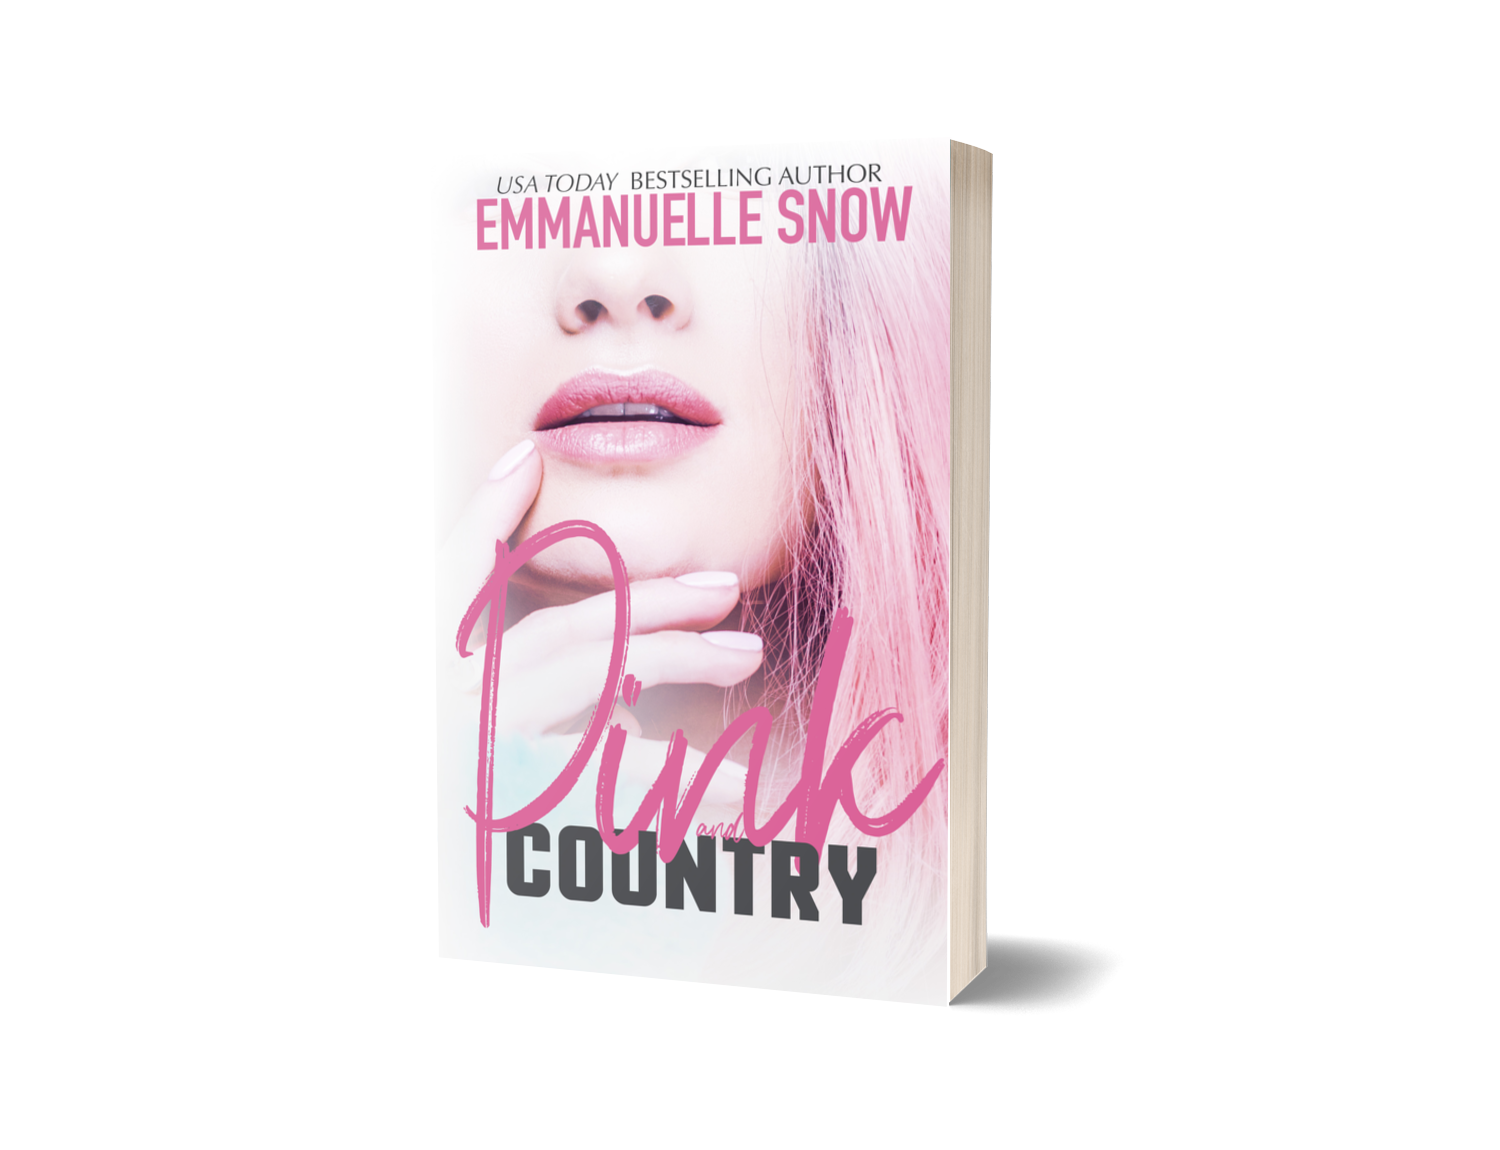 Pink and Country (signed copy)